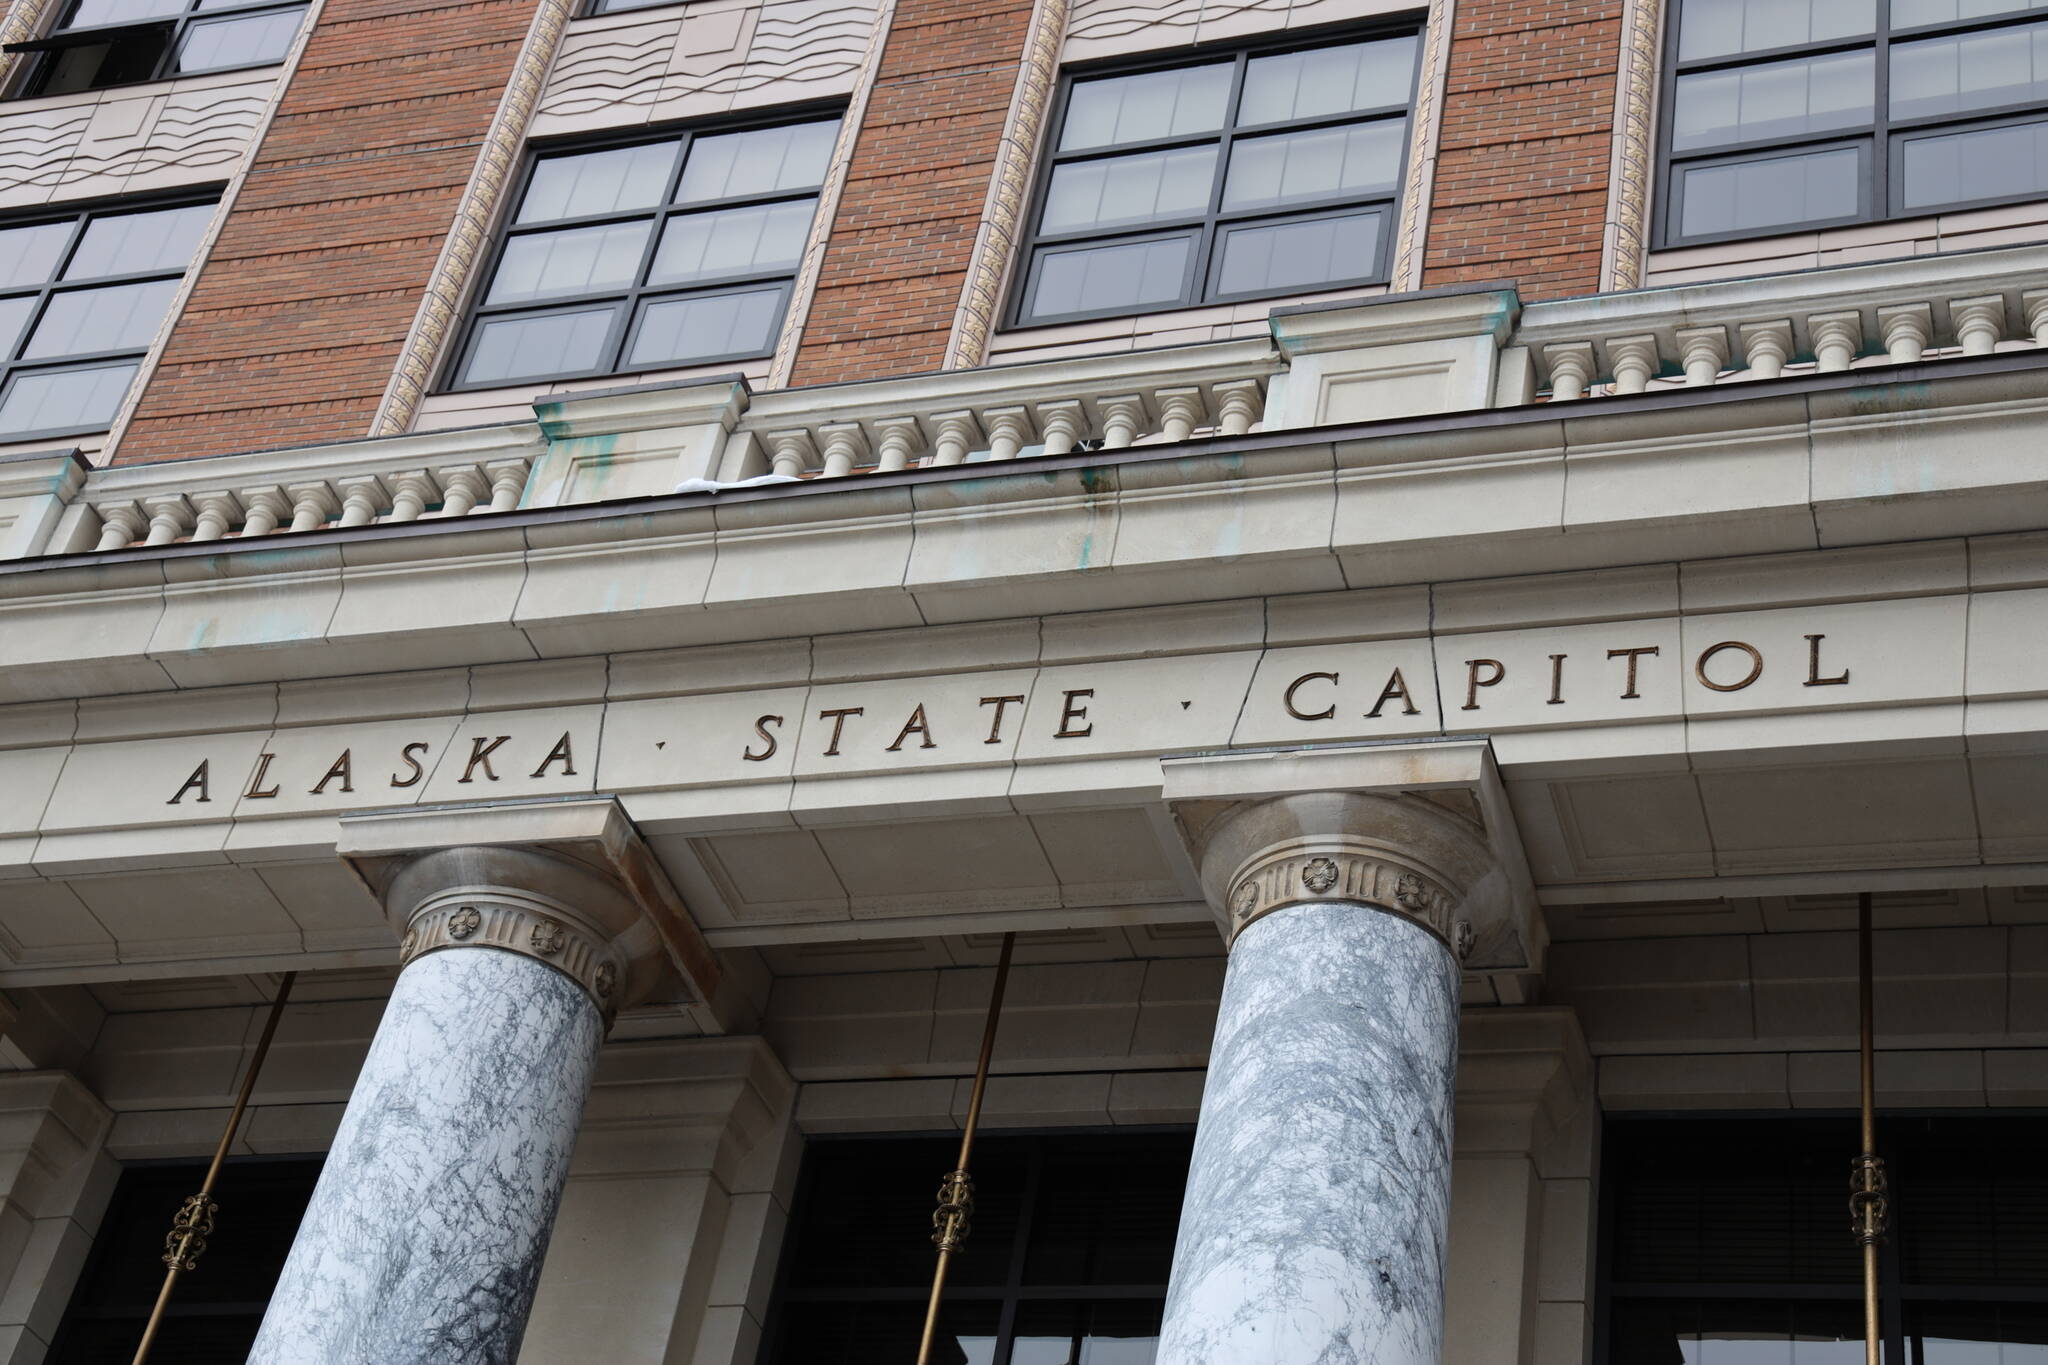 Legislators are about 50 days through the statutory 90-day limit for the session at the Alaska State Capitol, although in reality they are expected to meet for the 121 days allowed in Alaska’s Constitution. (Clarise Larson / Juneau Empire File)